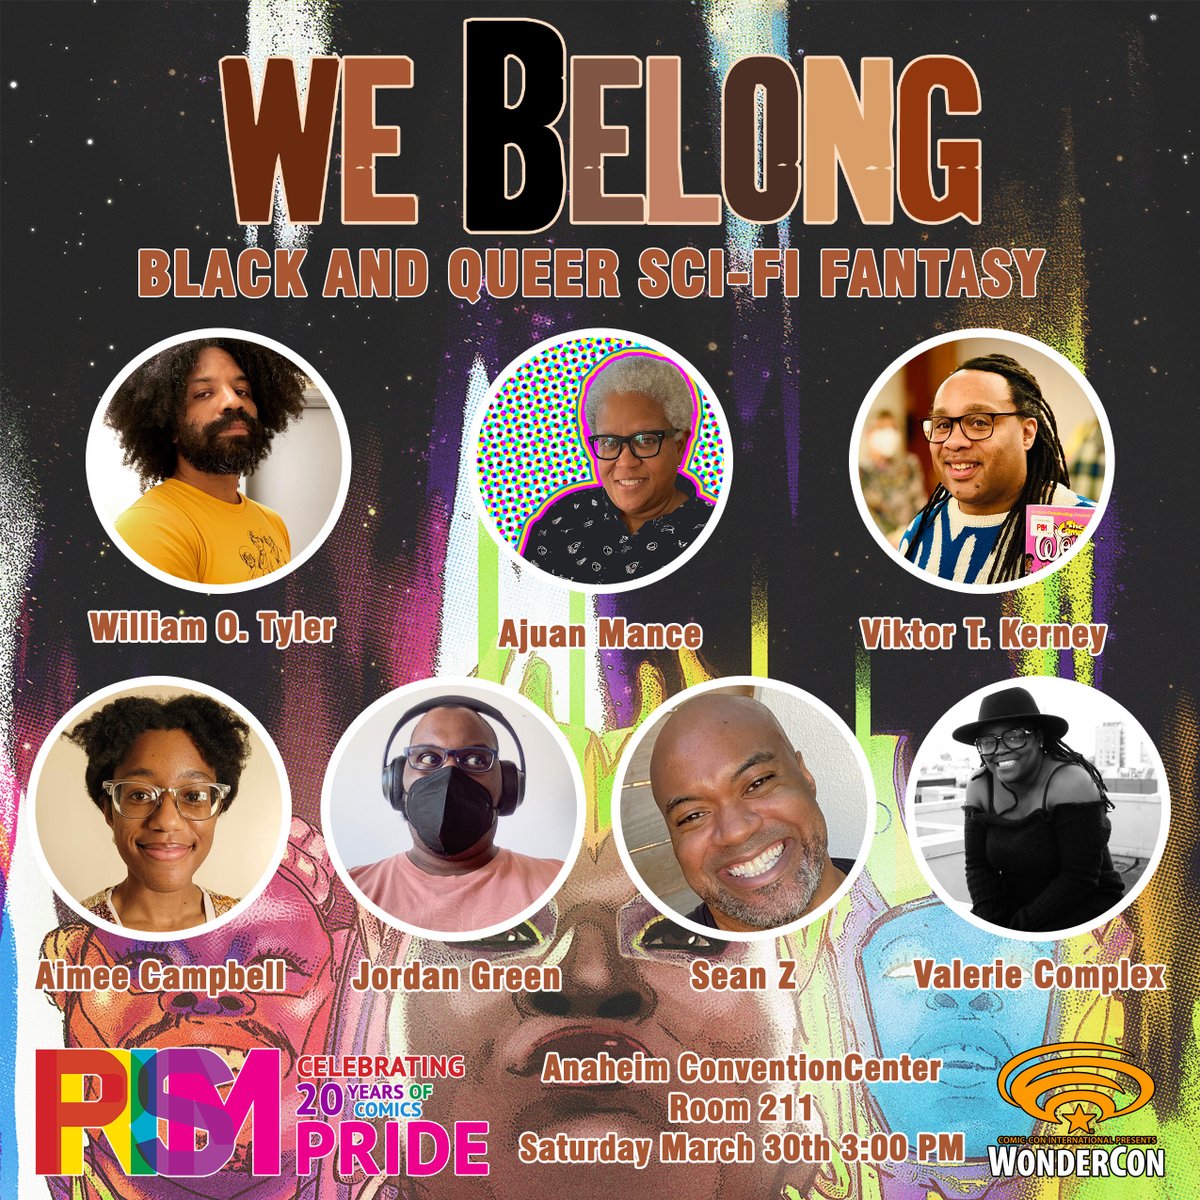 Join @PrismComics at @WonderCon March 30 at 3PM for We Belong: Black and Queer Sci-fi Fantasy! See @WilliamOTyler, @Wondermann5, @makocakess, @AjuanMance, Jordan Green, @ZMakerArt, and @ValerieComplex for a lively discussion of this amazing comics anthology from @StackedDeckPrss!